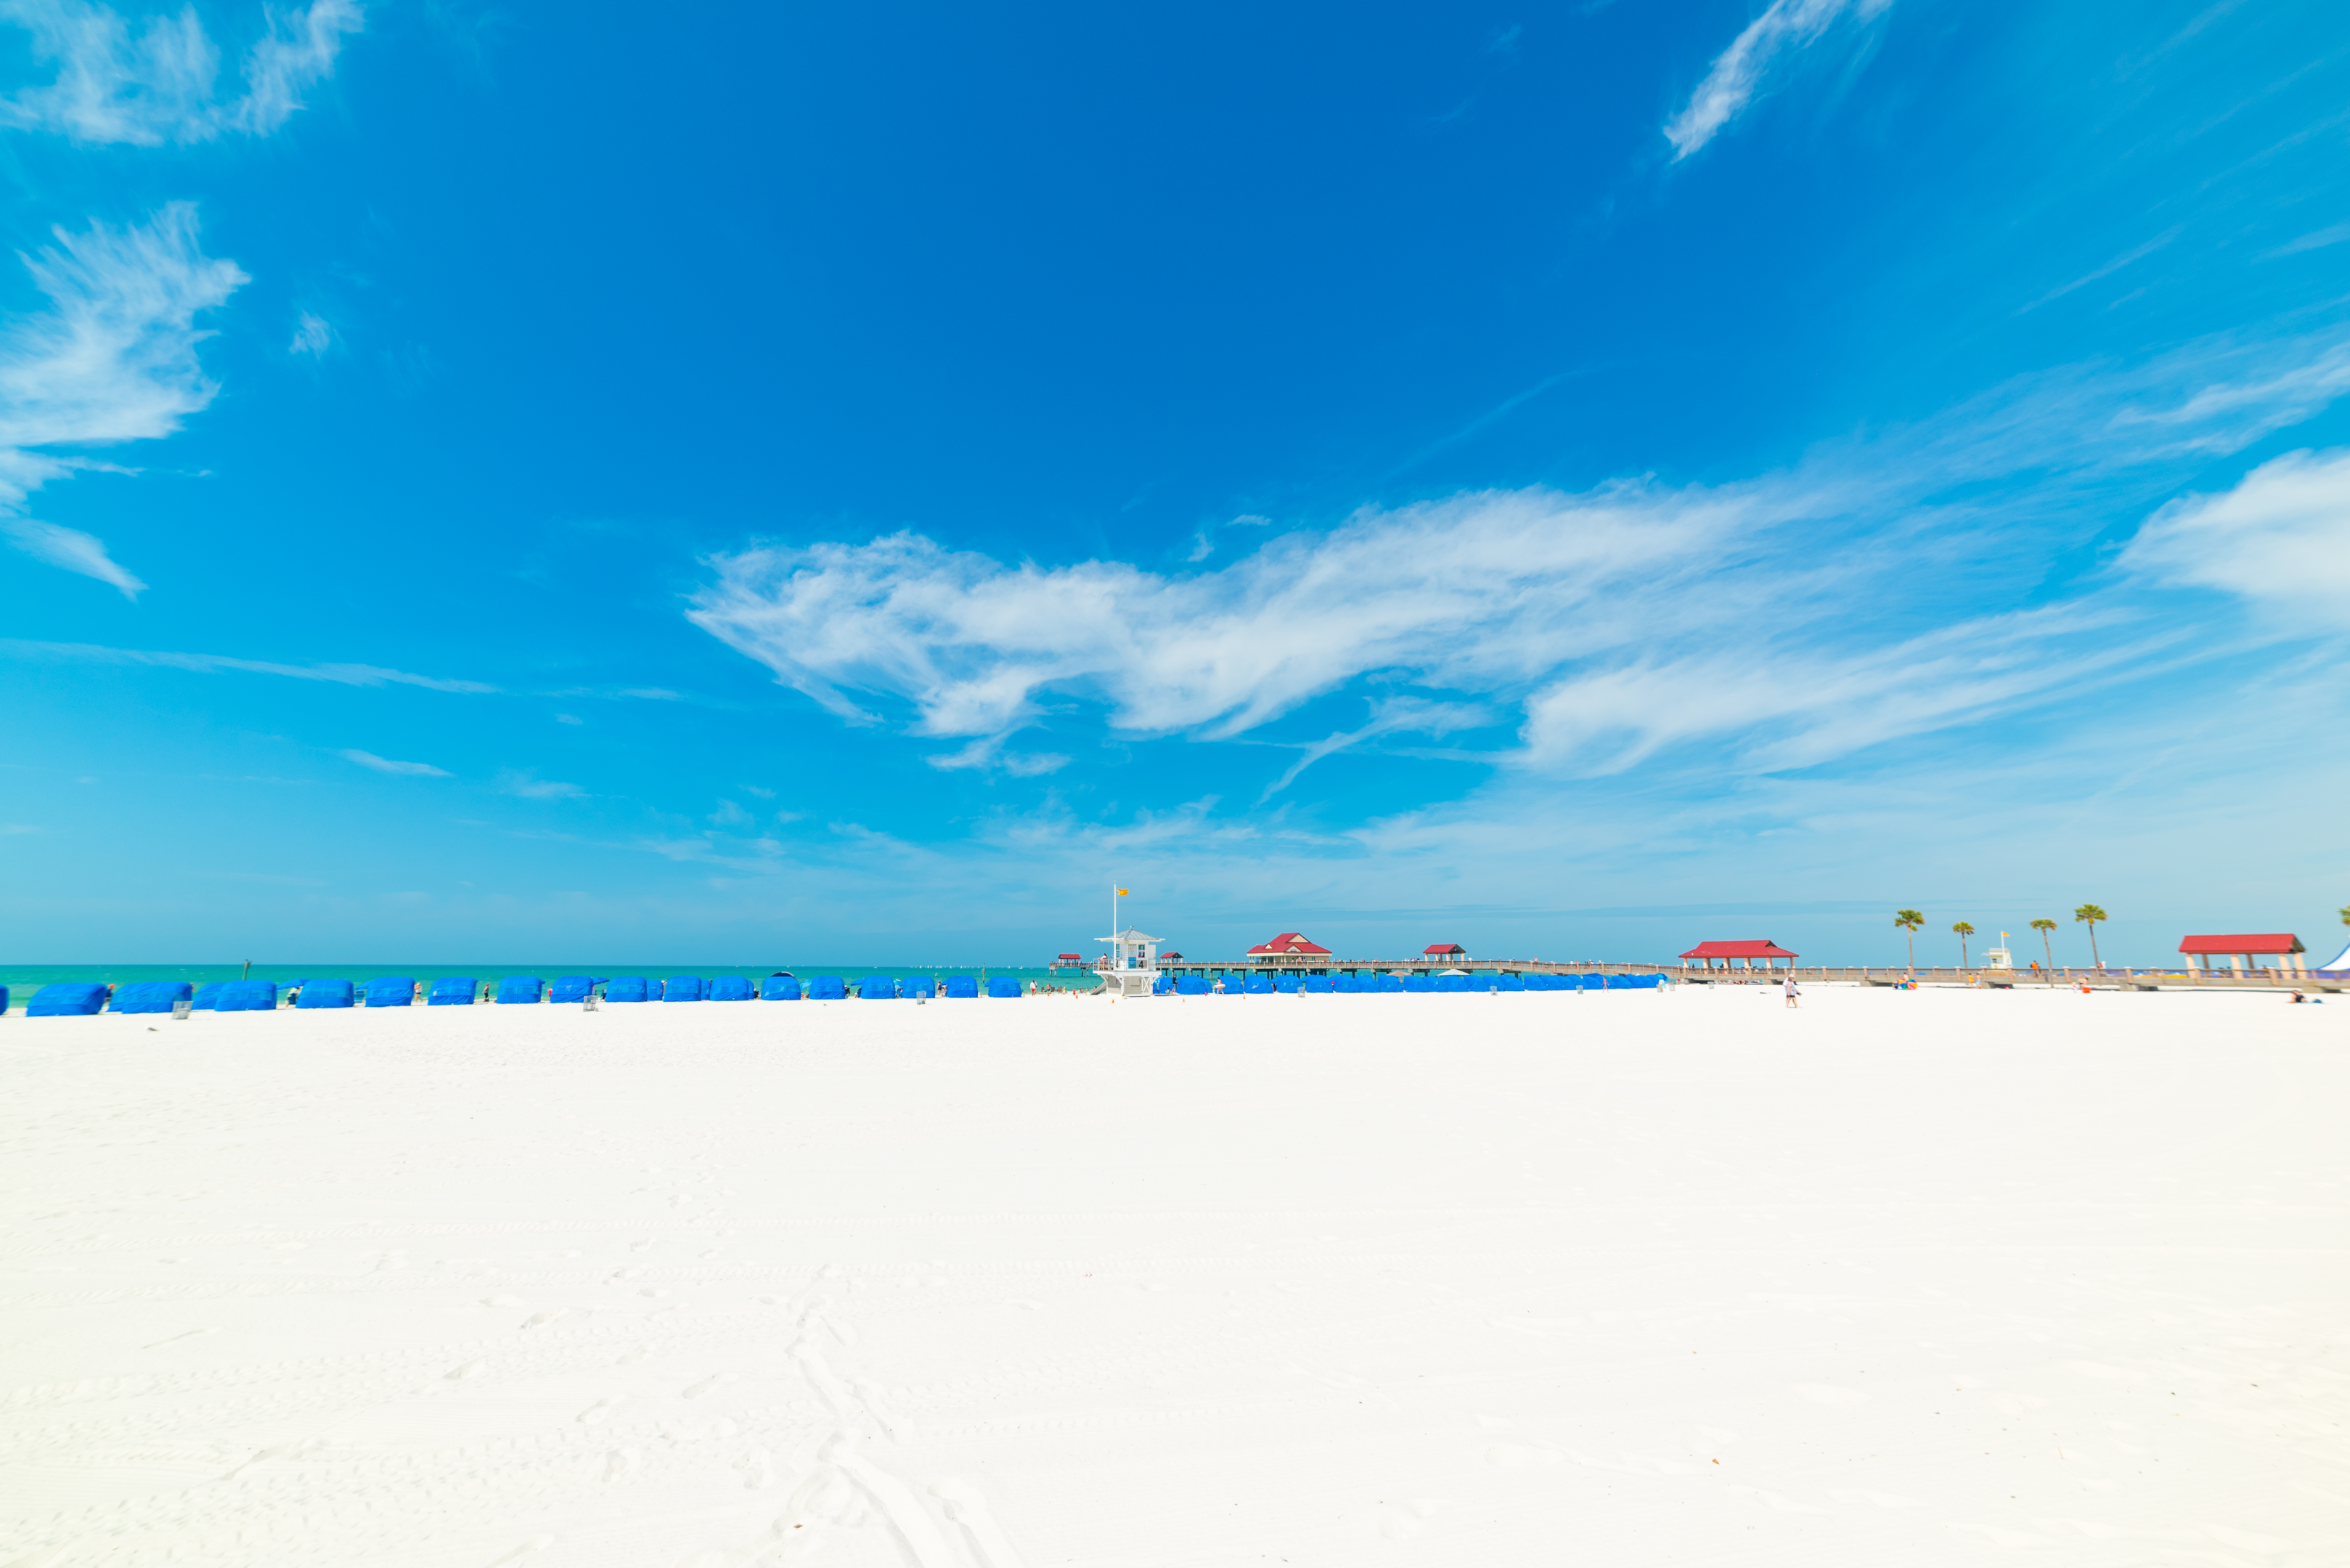 Clearwater Beach with white sand, blue skies, and blue beach chairs and people by the shore